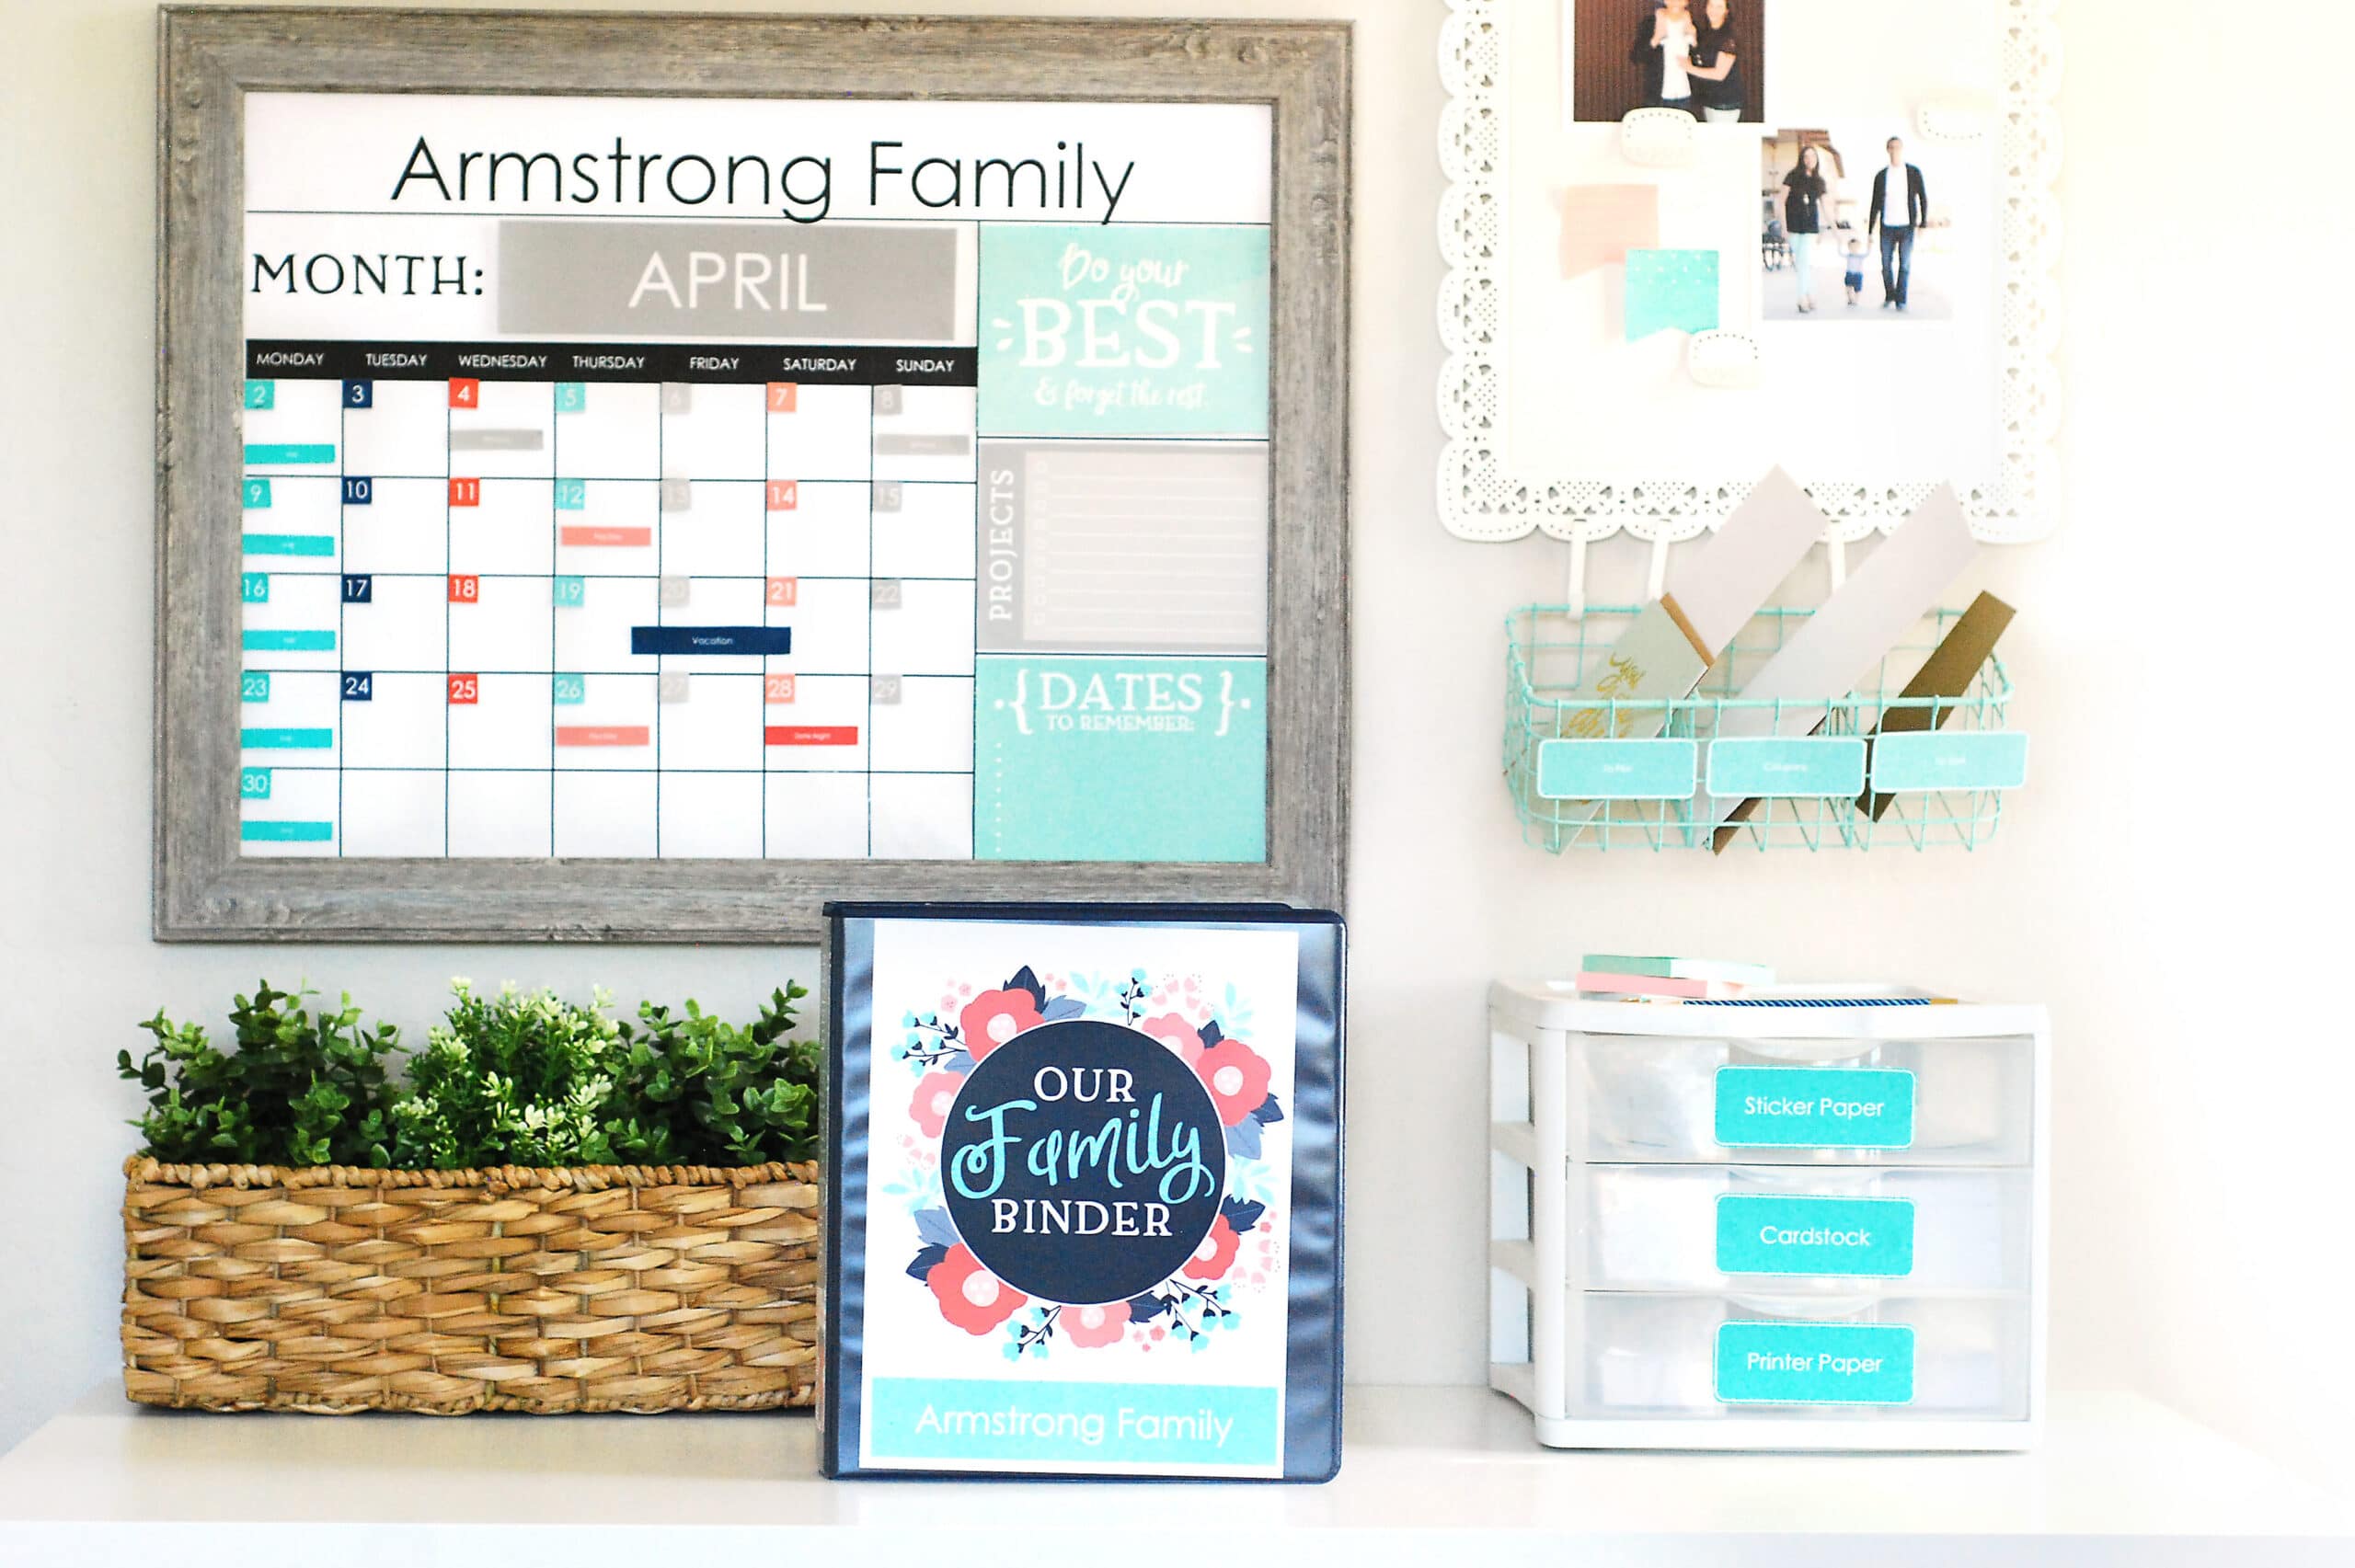 A personalized calendar and other bridal shower gifts to help with family organization | The Dating Divas